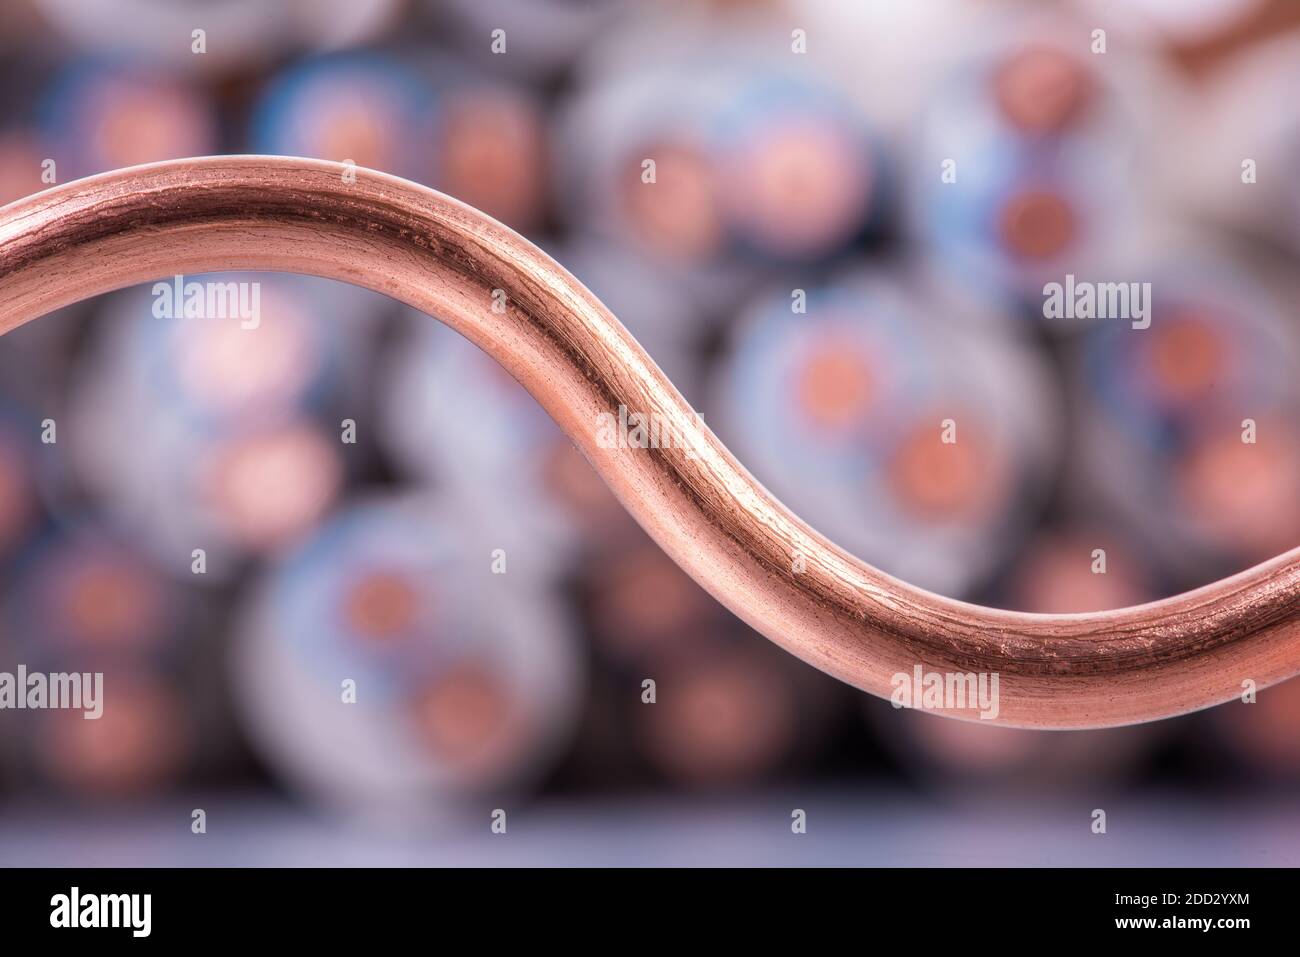 Macro detail of copper wire on blurred background Stock Photo